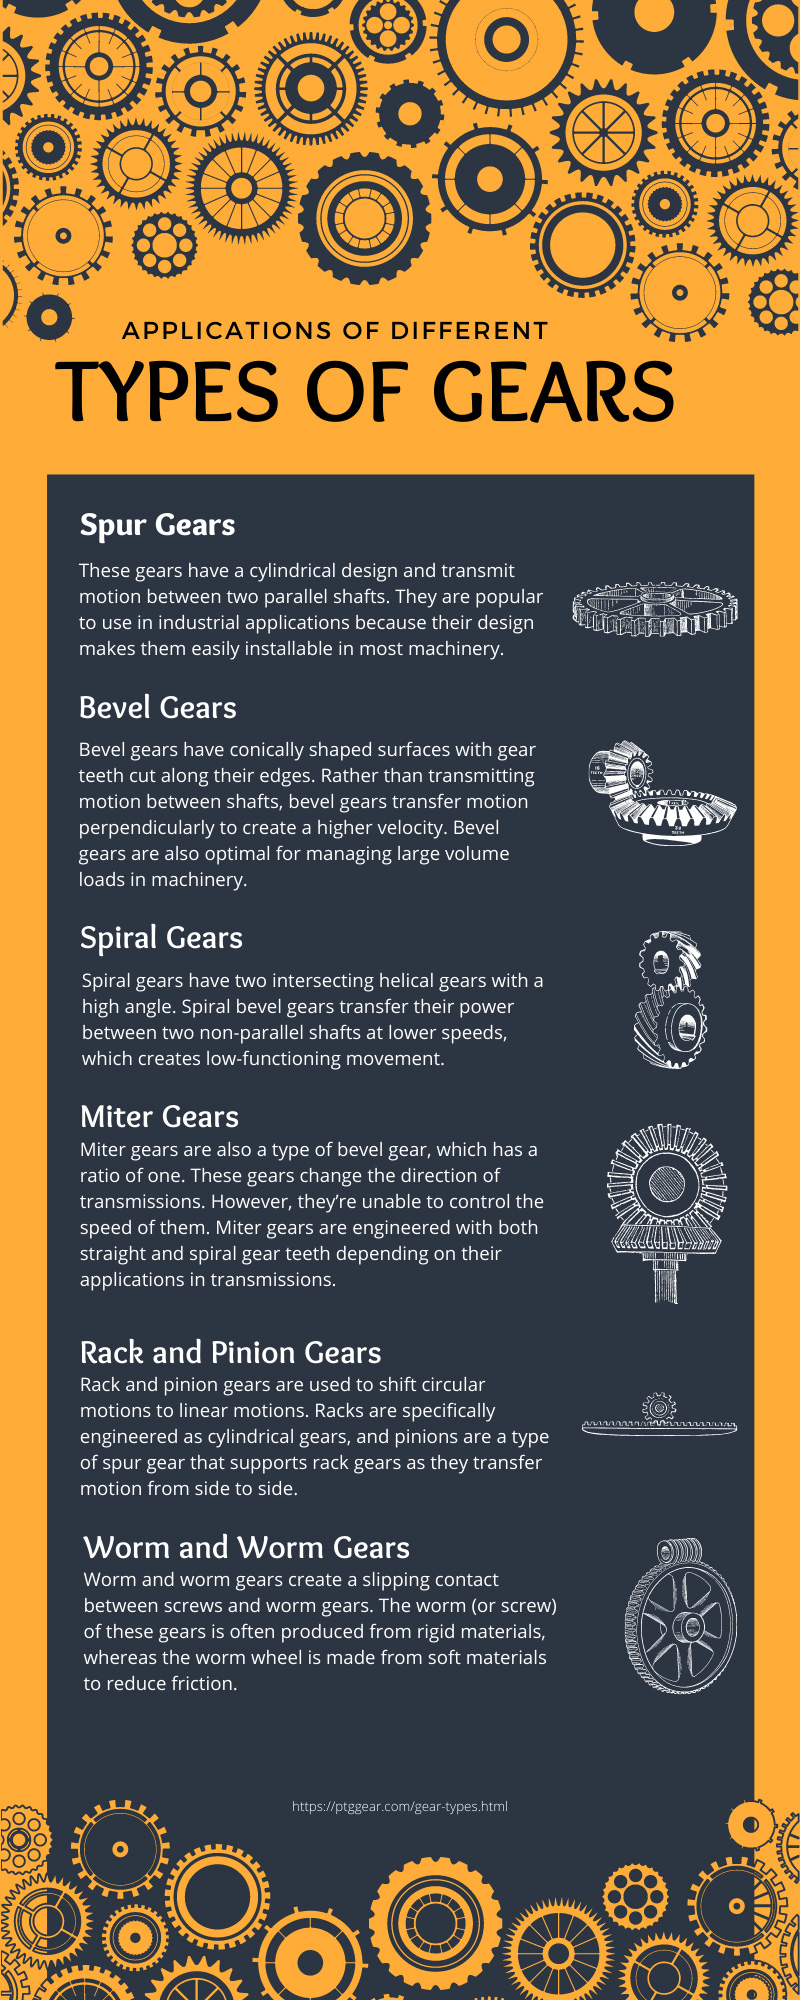 Applications of Different Types of Gears